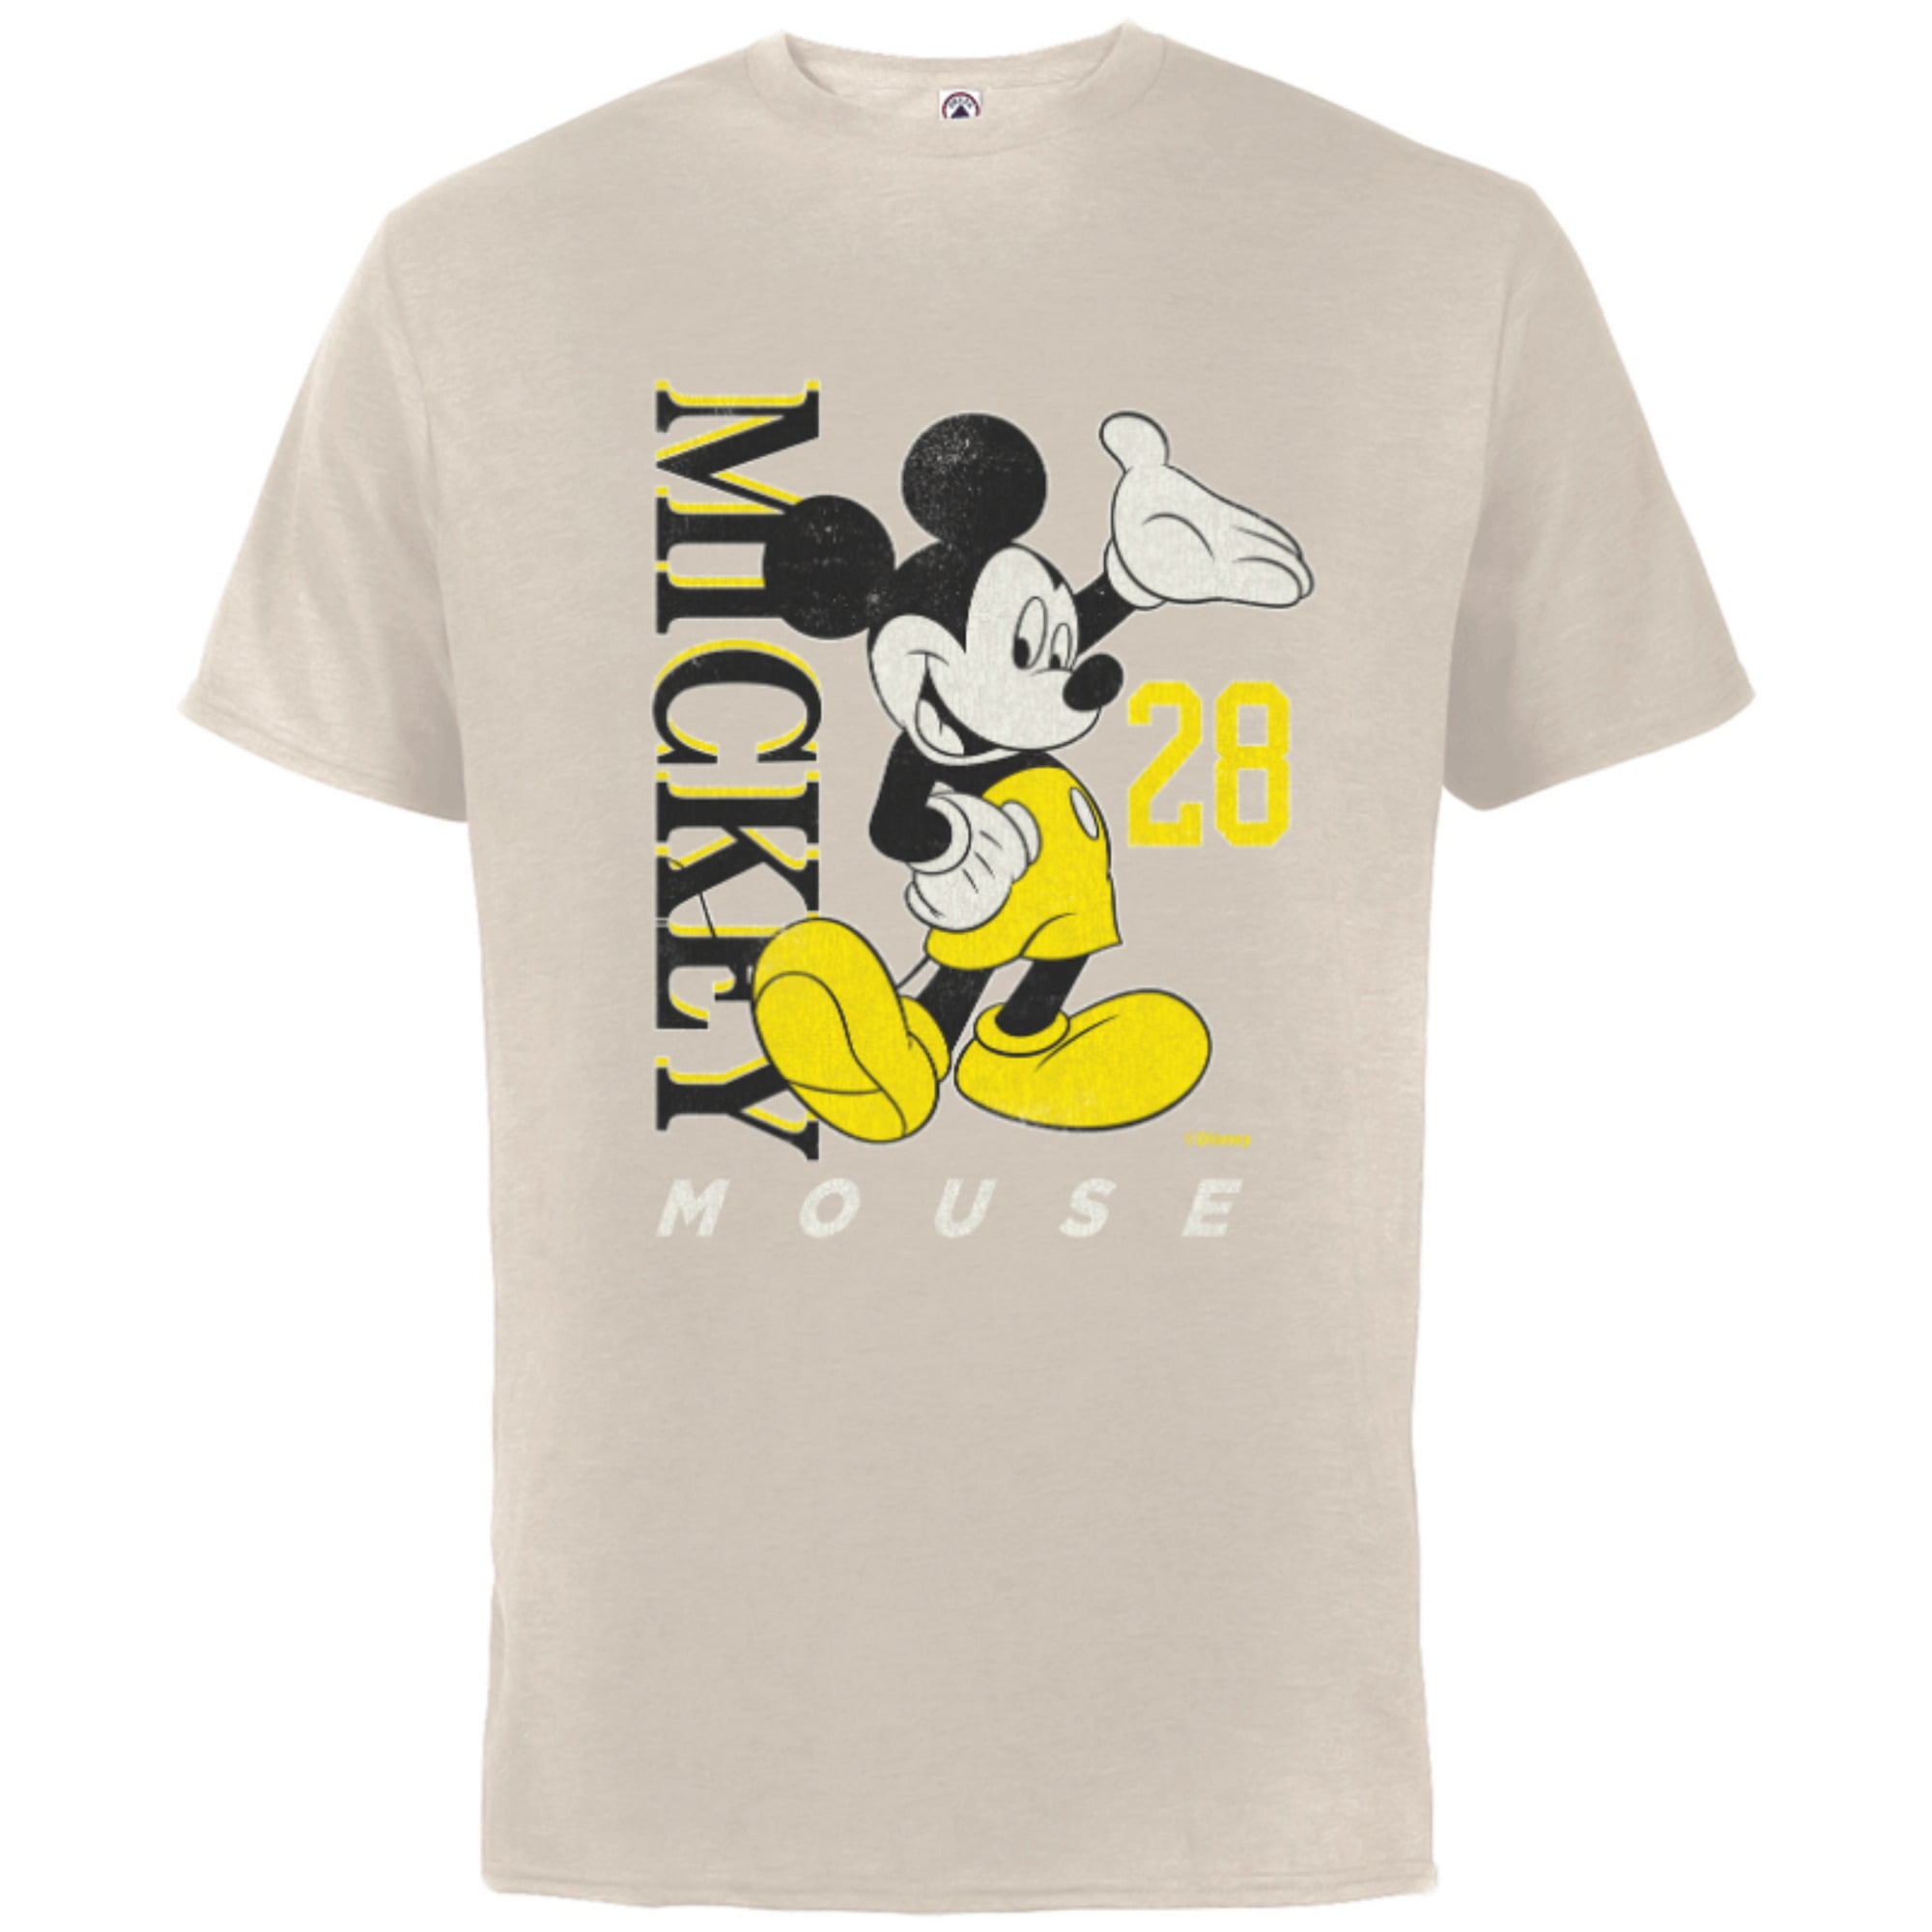 T-Shirt Sleeve Mouse & - Adults Cotton Vintage Customized-Black Short Yellow 28 Black Disney Classics Mickey for -